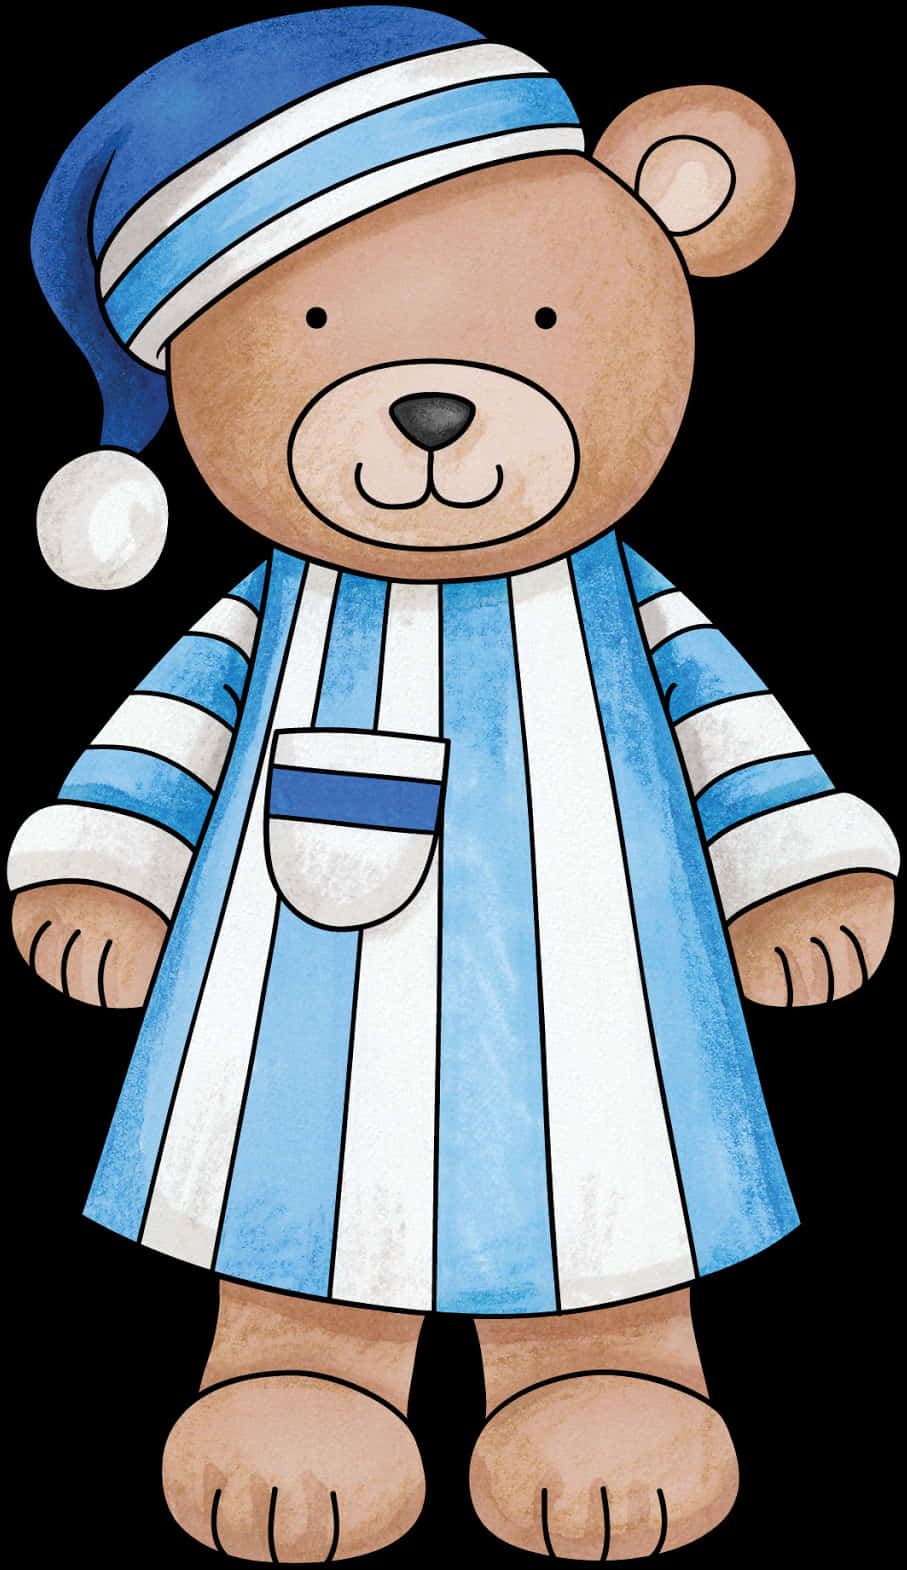 A Cartoon Of A Teddy Bear Wearing A Blue And White Striped Robe